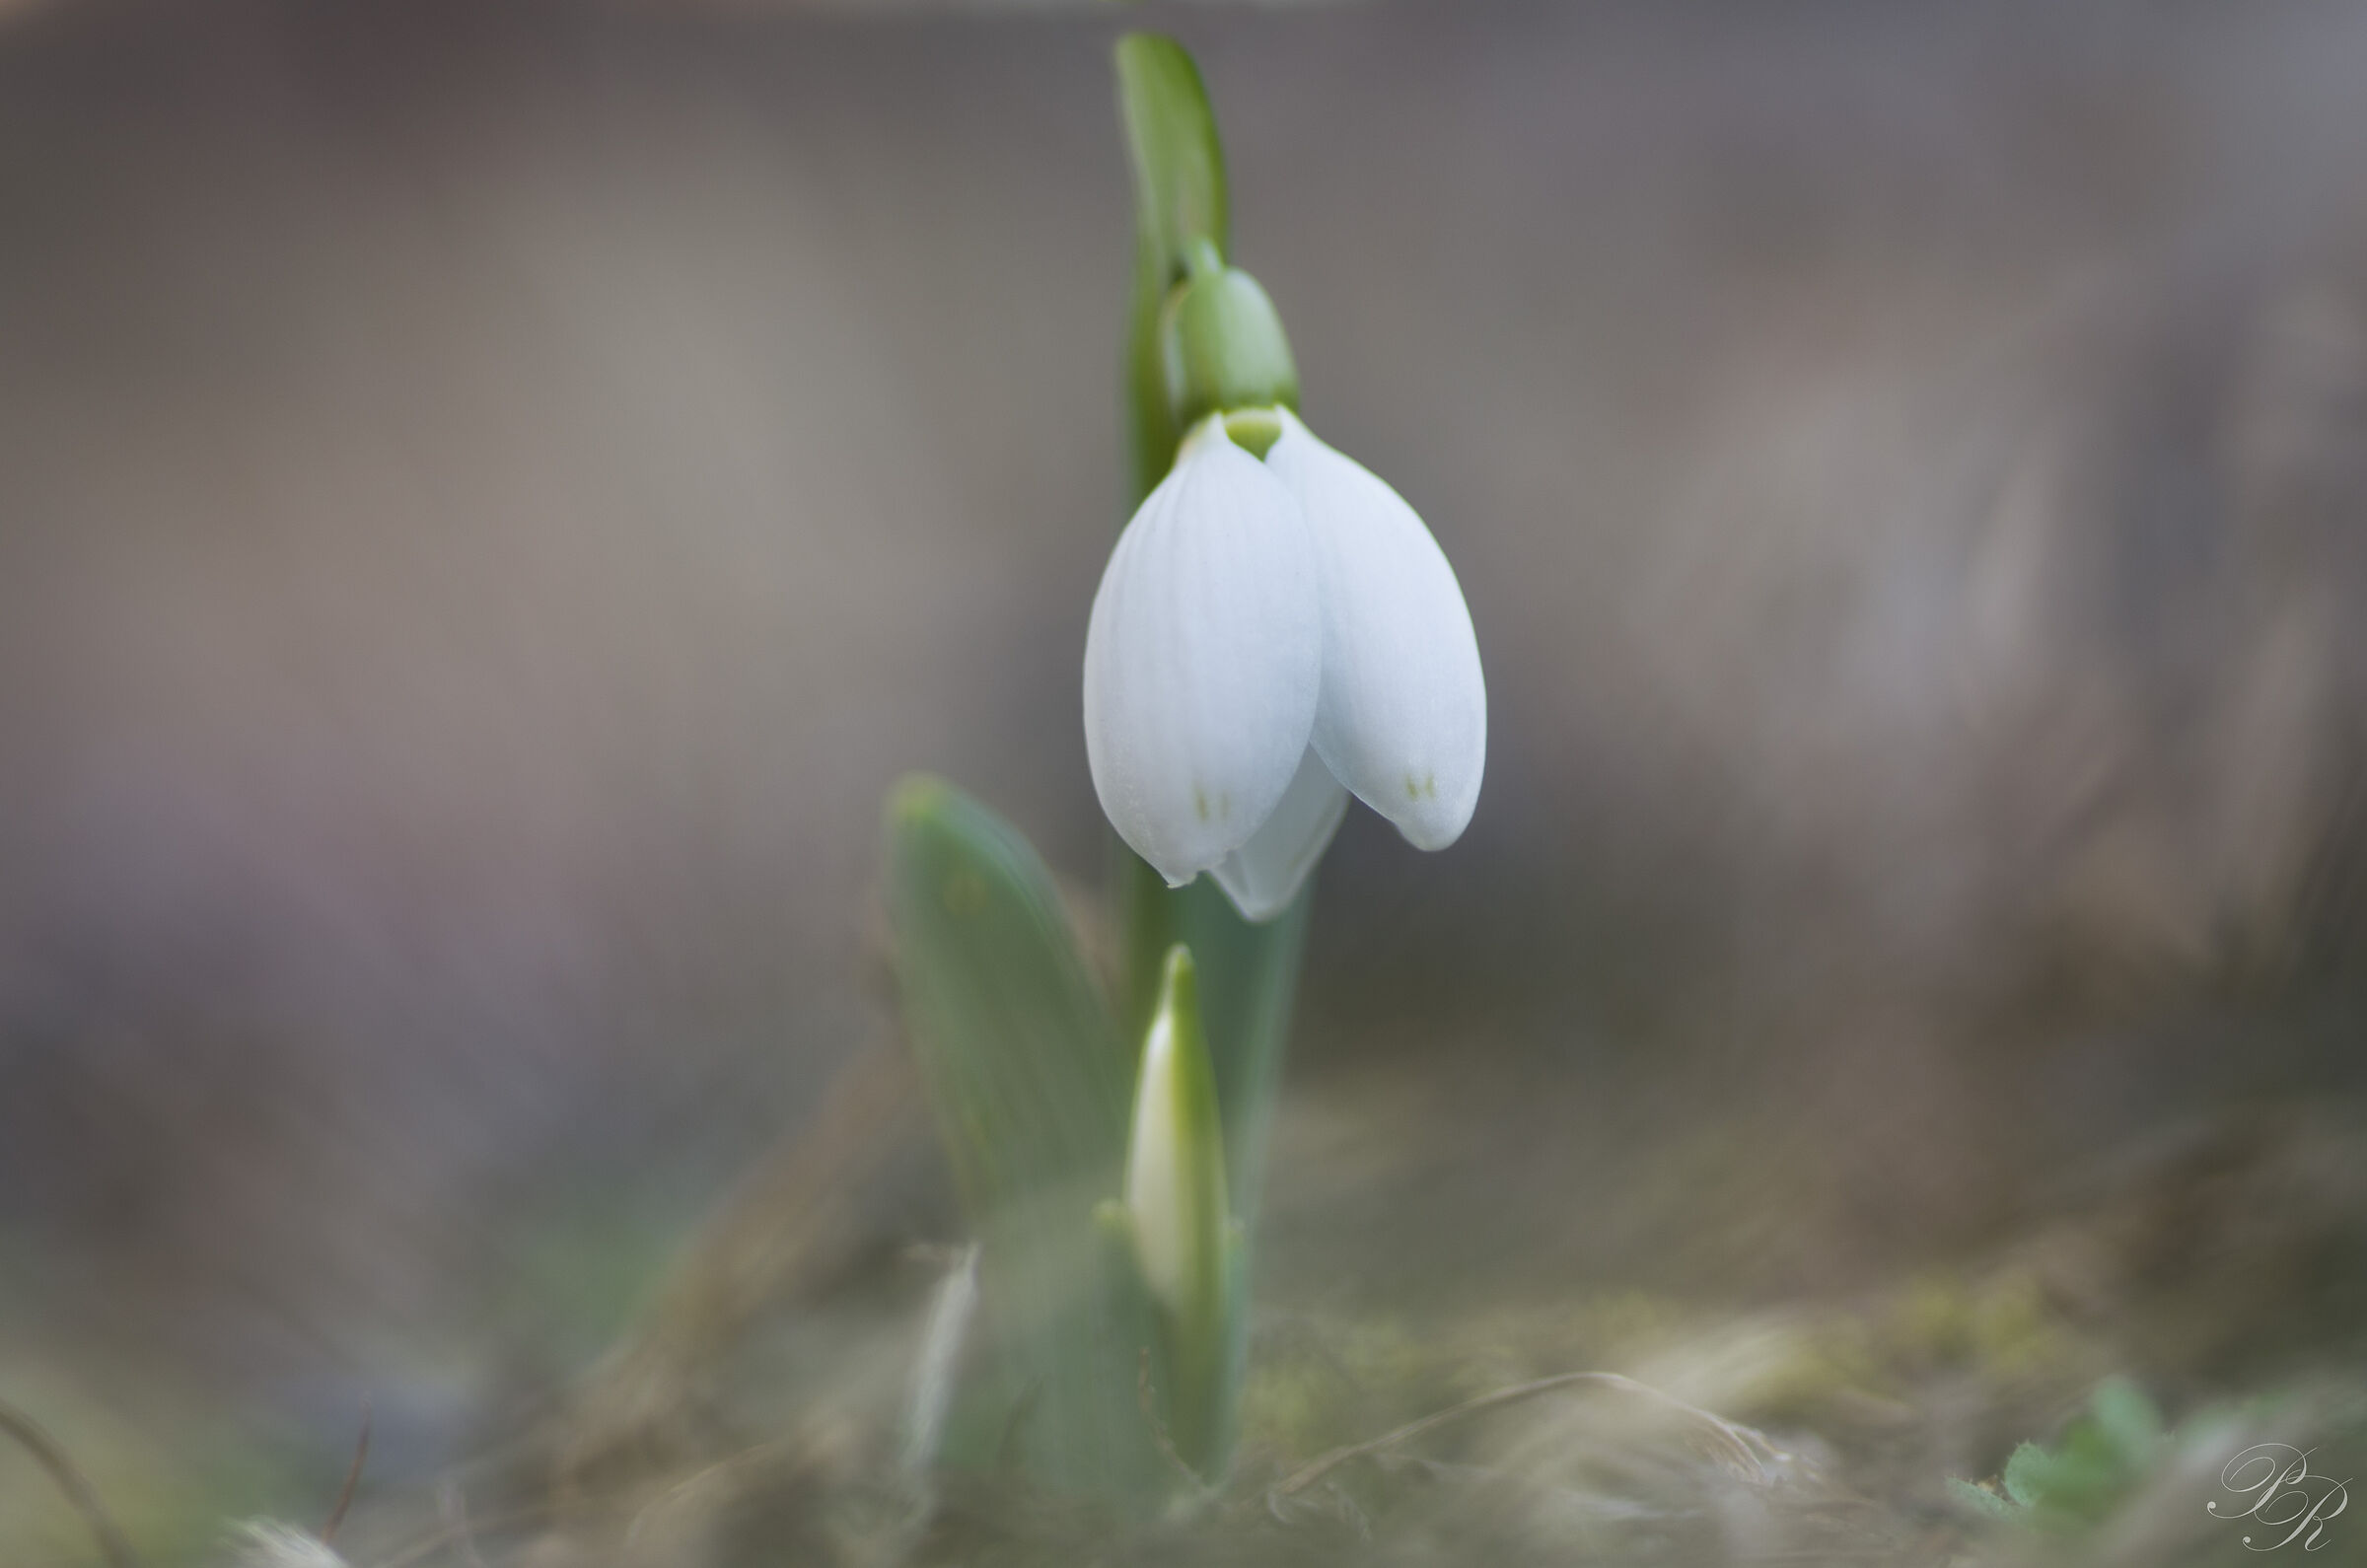 The first snowdrop...